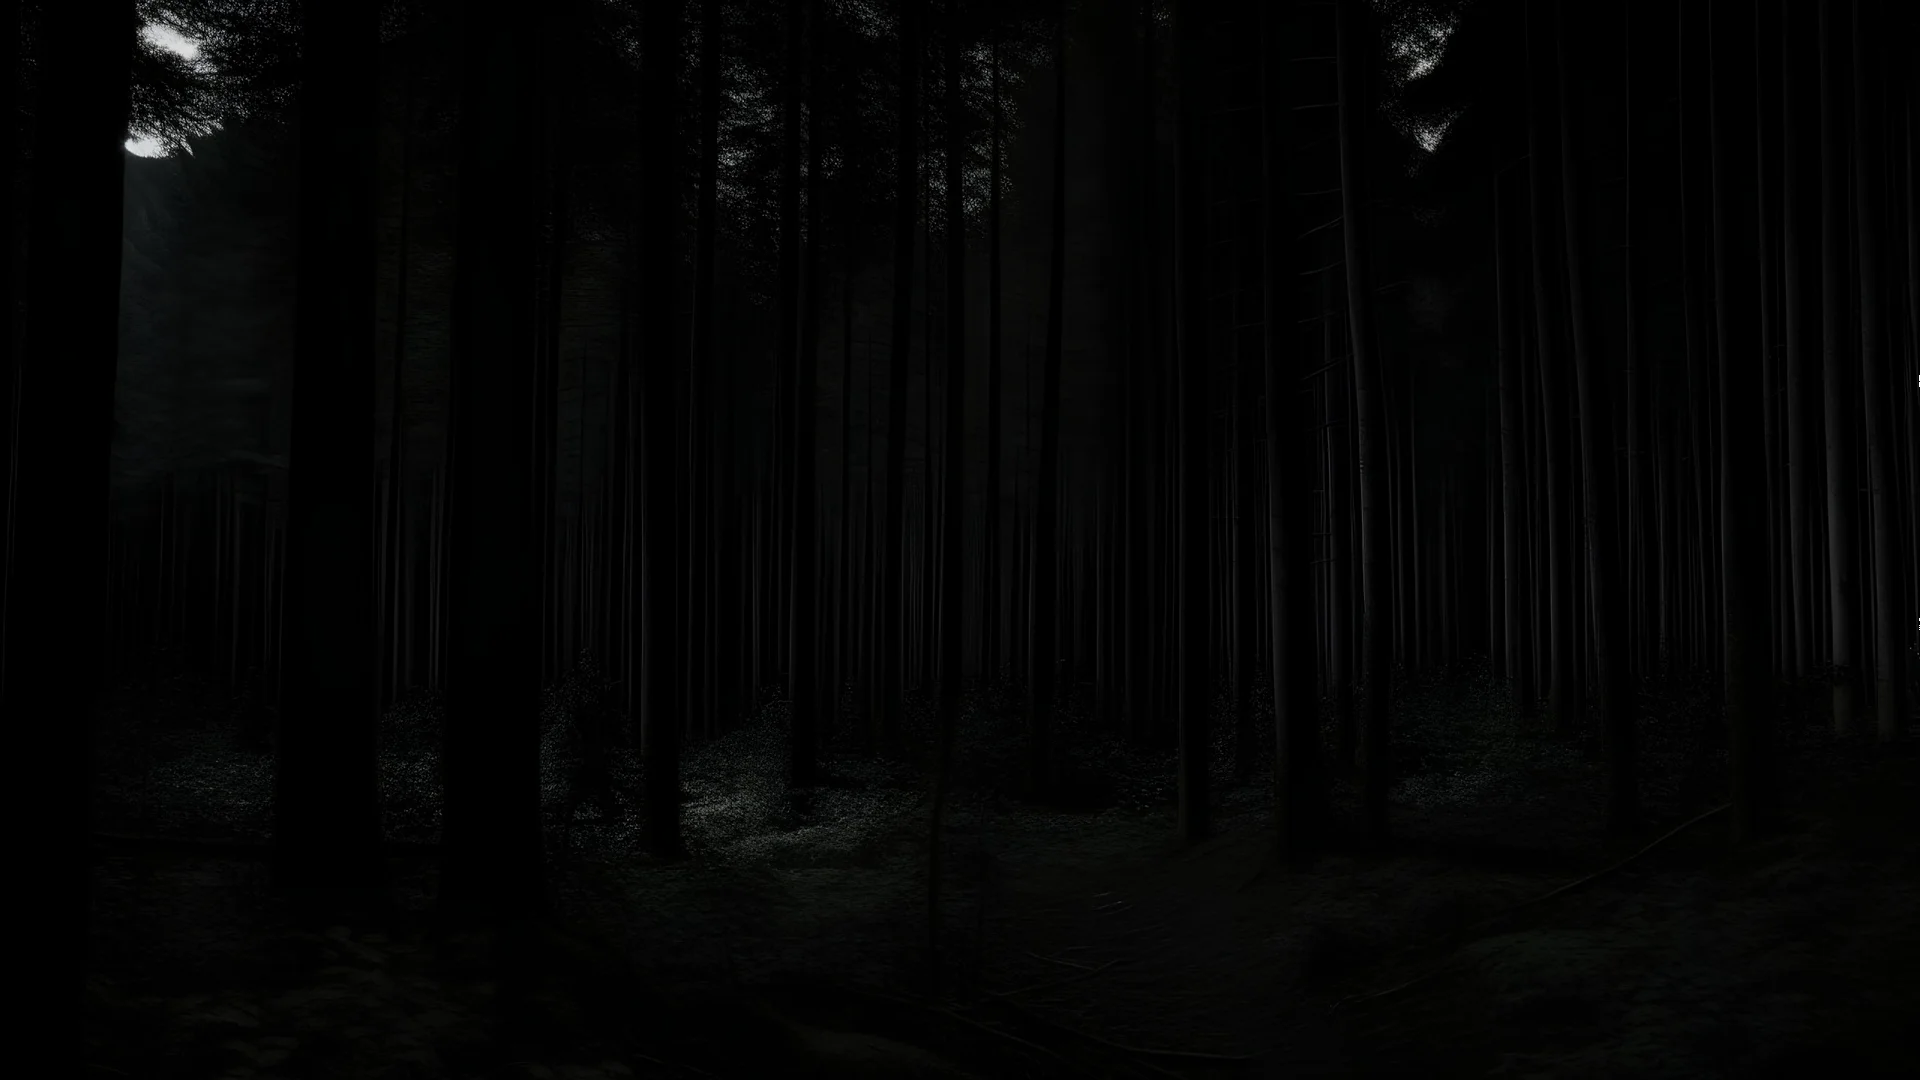 A forest on a very dark night, dense trees. no light